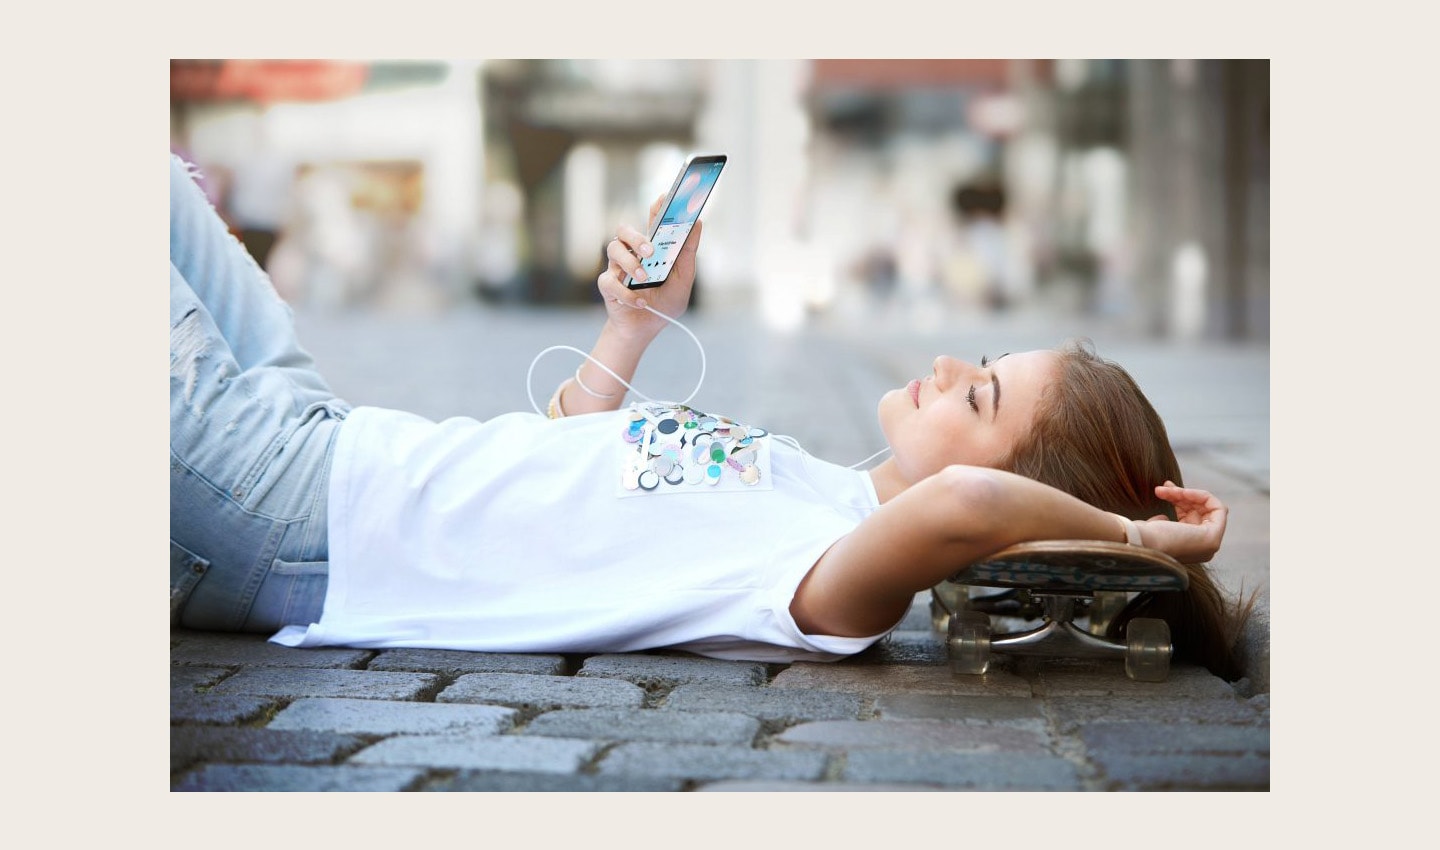 A woman lies on the ground with her skateboard while listening to music on headphones on her LG Q6